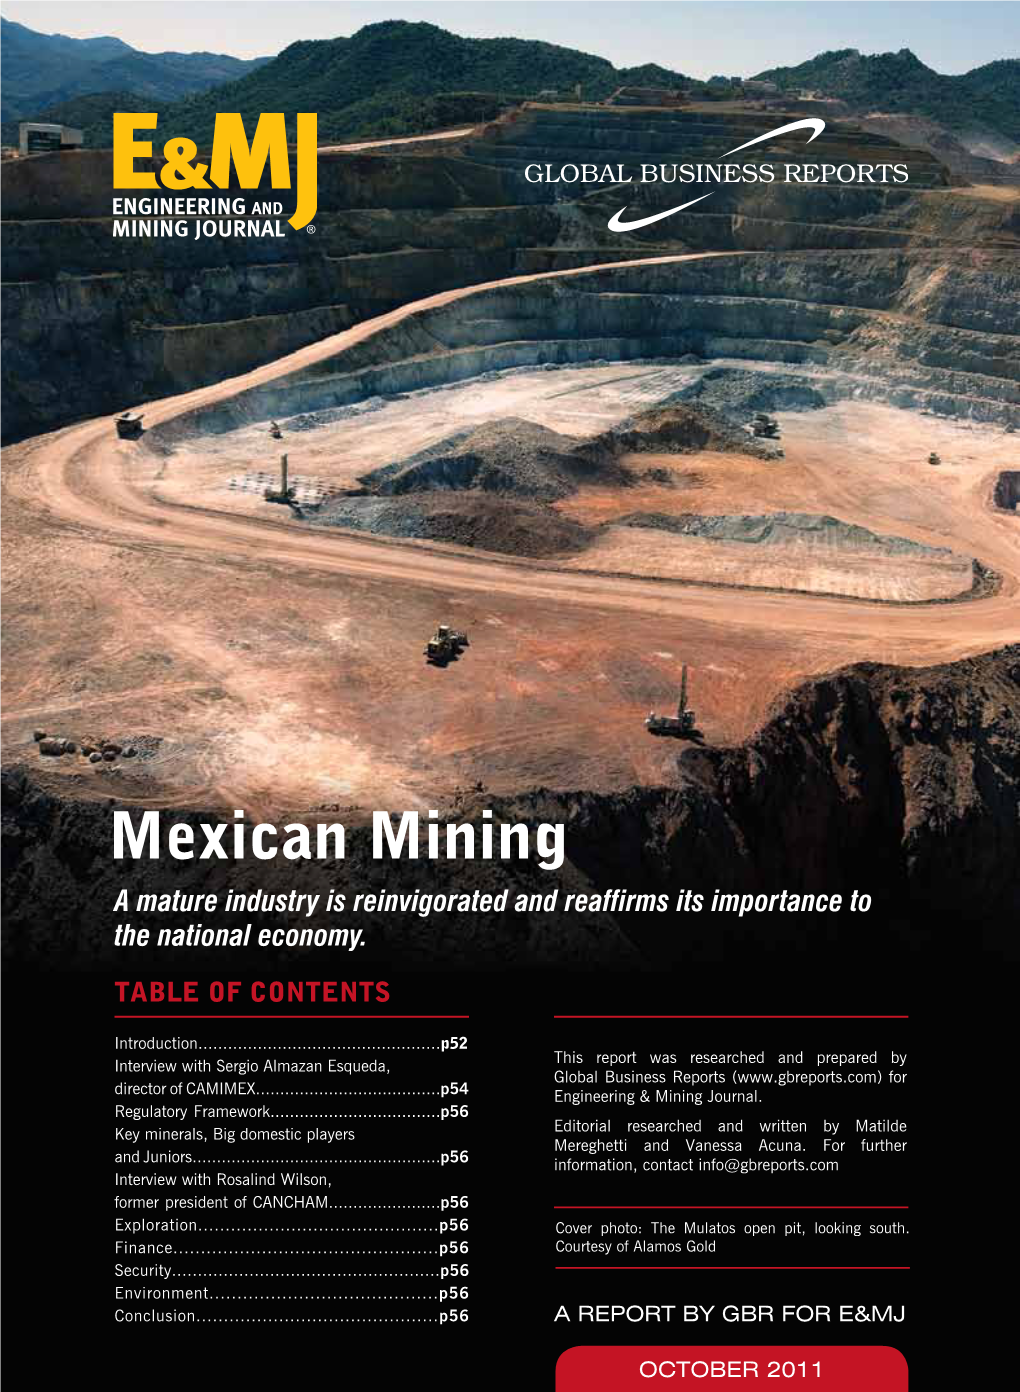 Mexican Mining a Mature Industry Is Reinvigorated and Reaffirms Its Importance to the National Economy